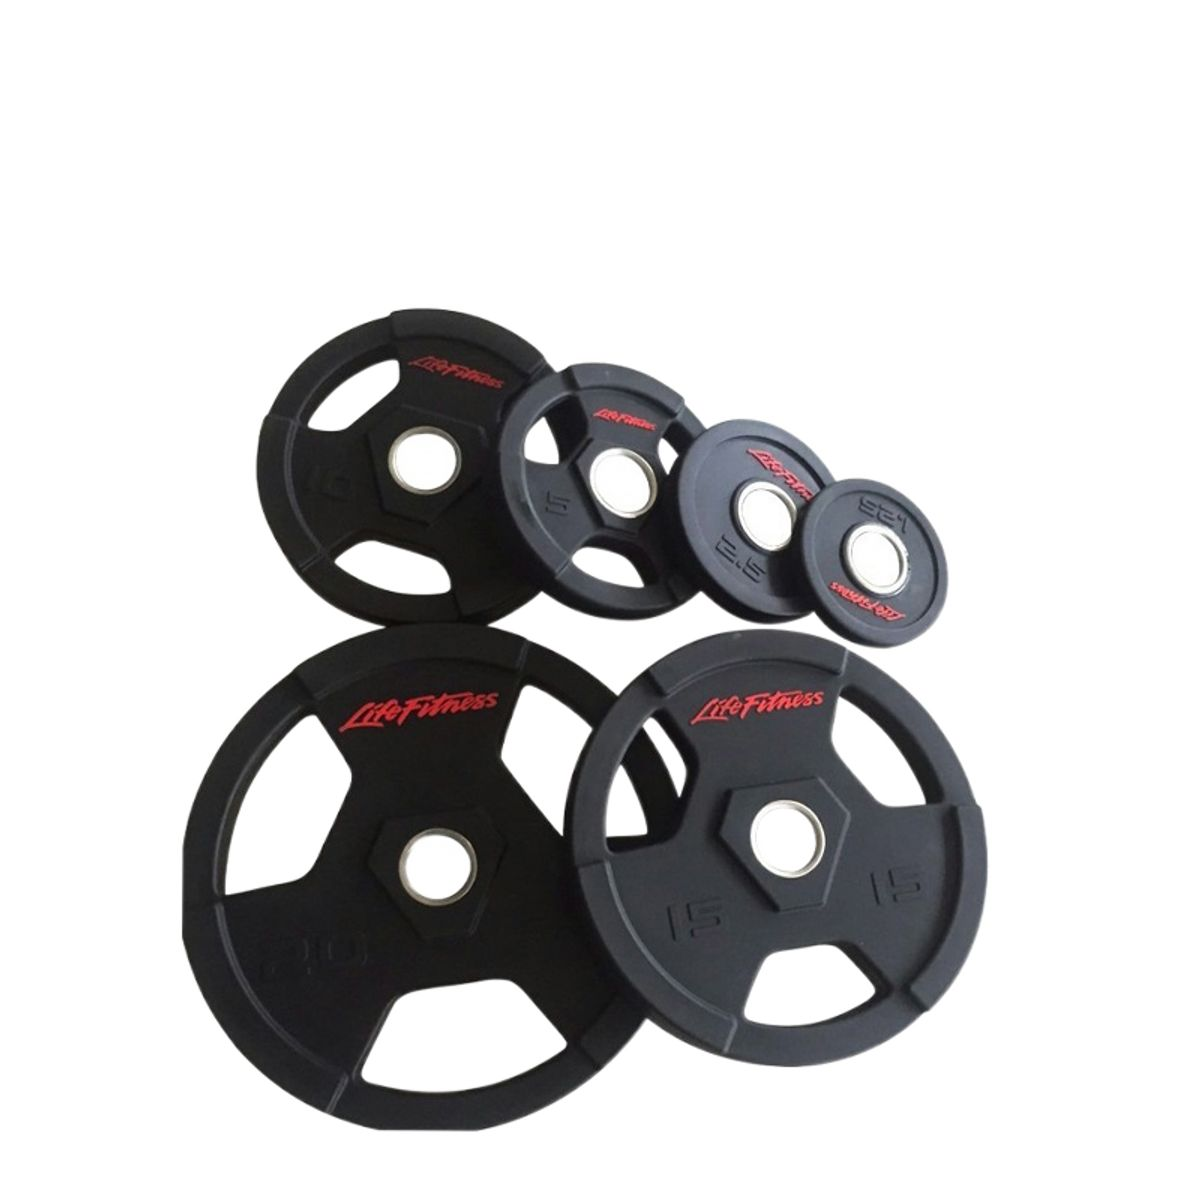 Wholesale weight plates barbell for gym fitness Featured Image